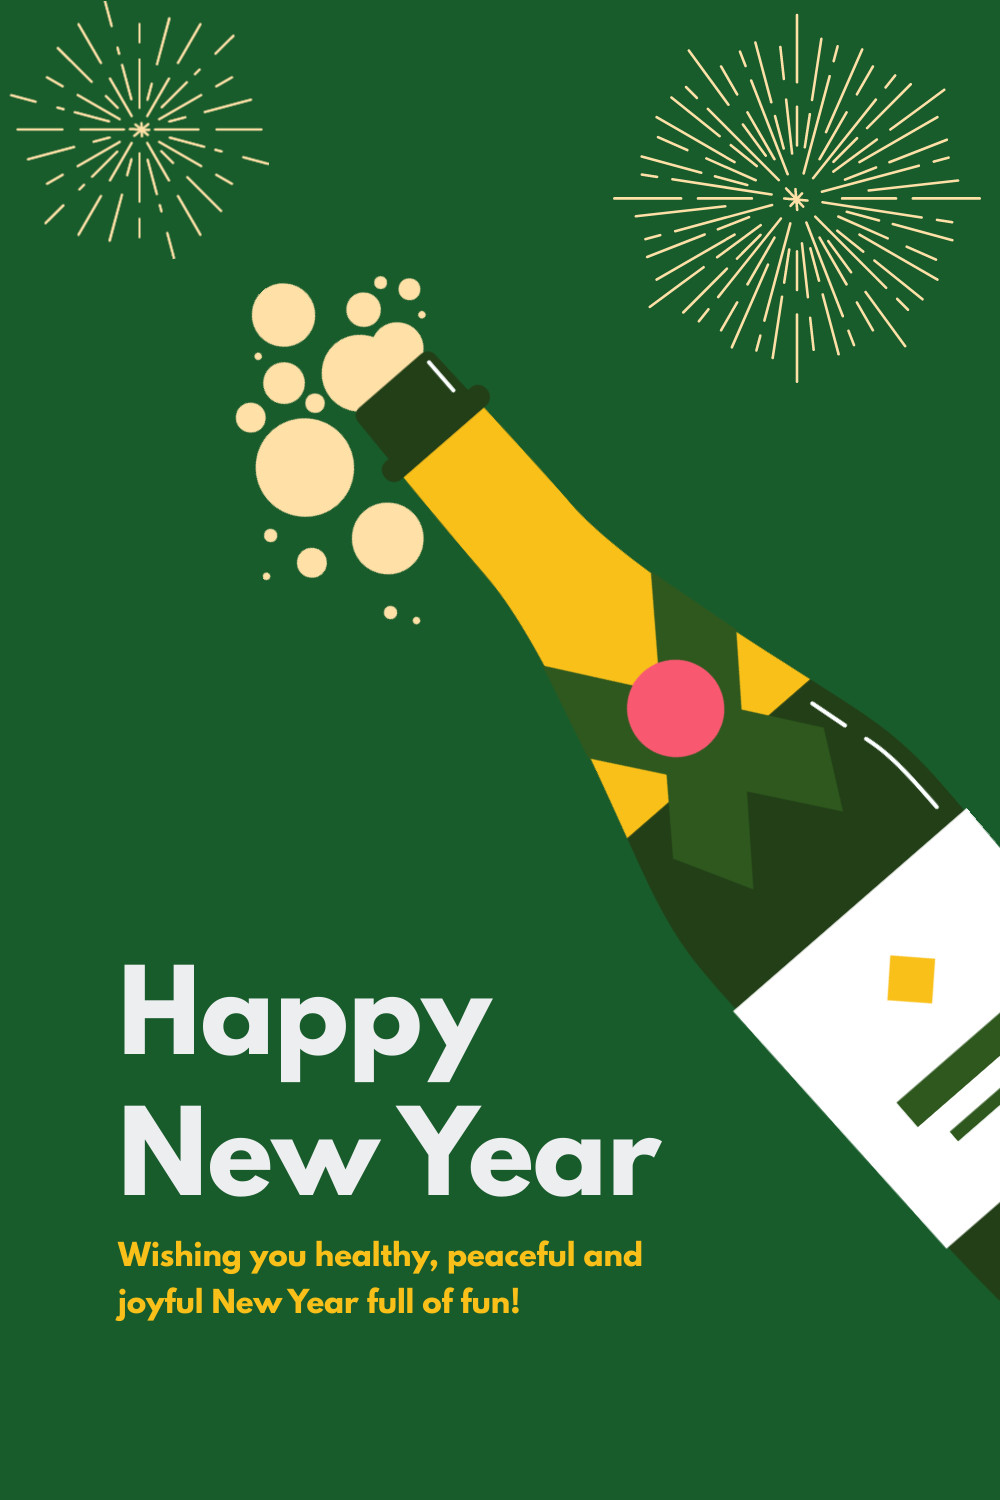 Healthy Peaceful New Year Champagne Facebook Cover 820x360